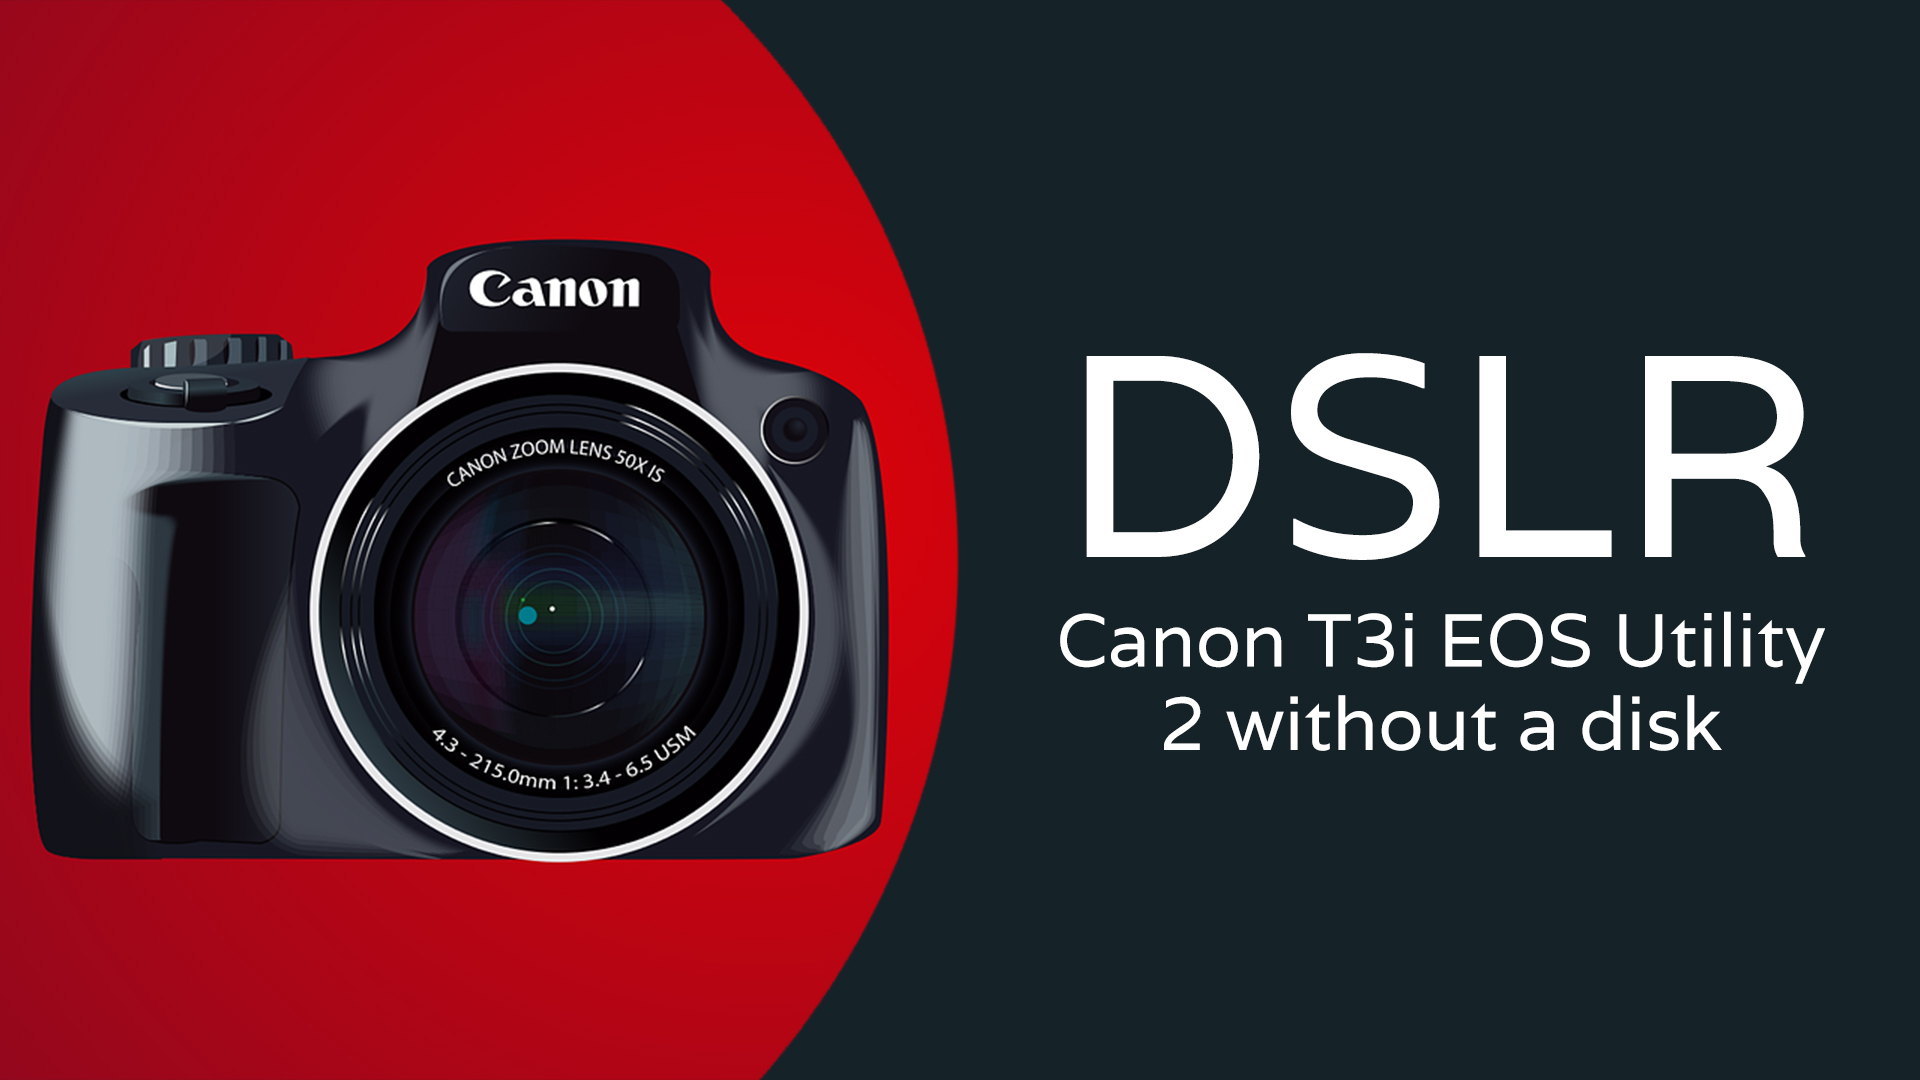 Canon T3i EOS Utility 2 Download for OSX | Founder at work